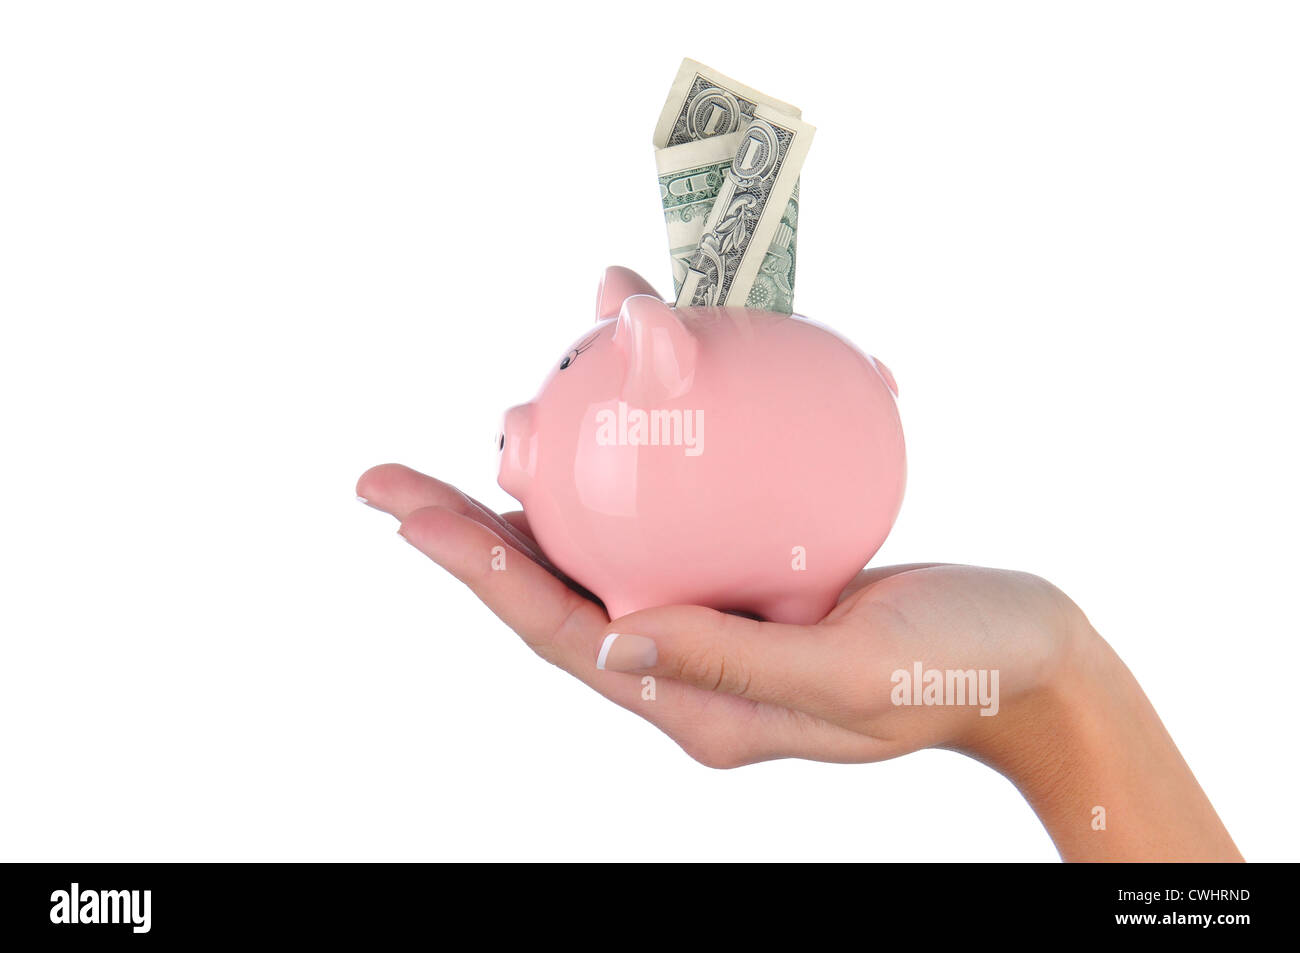 Closeup of a woman's hand holding a pink piggy bank with a dollar bill stuck in the top slot. Stock Photo